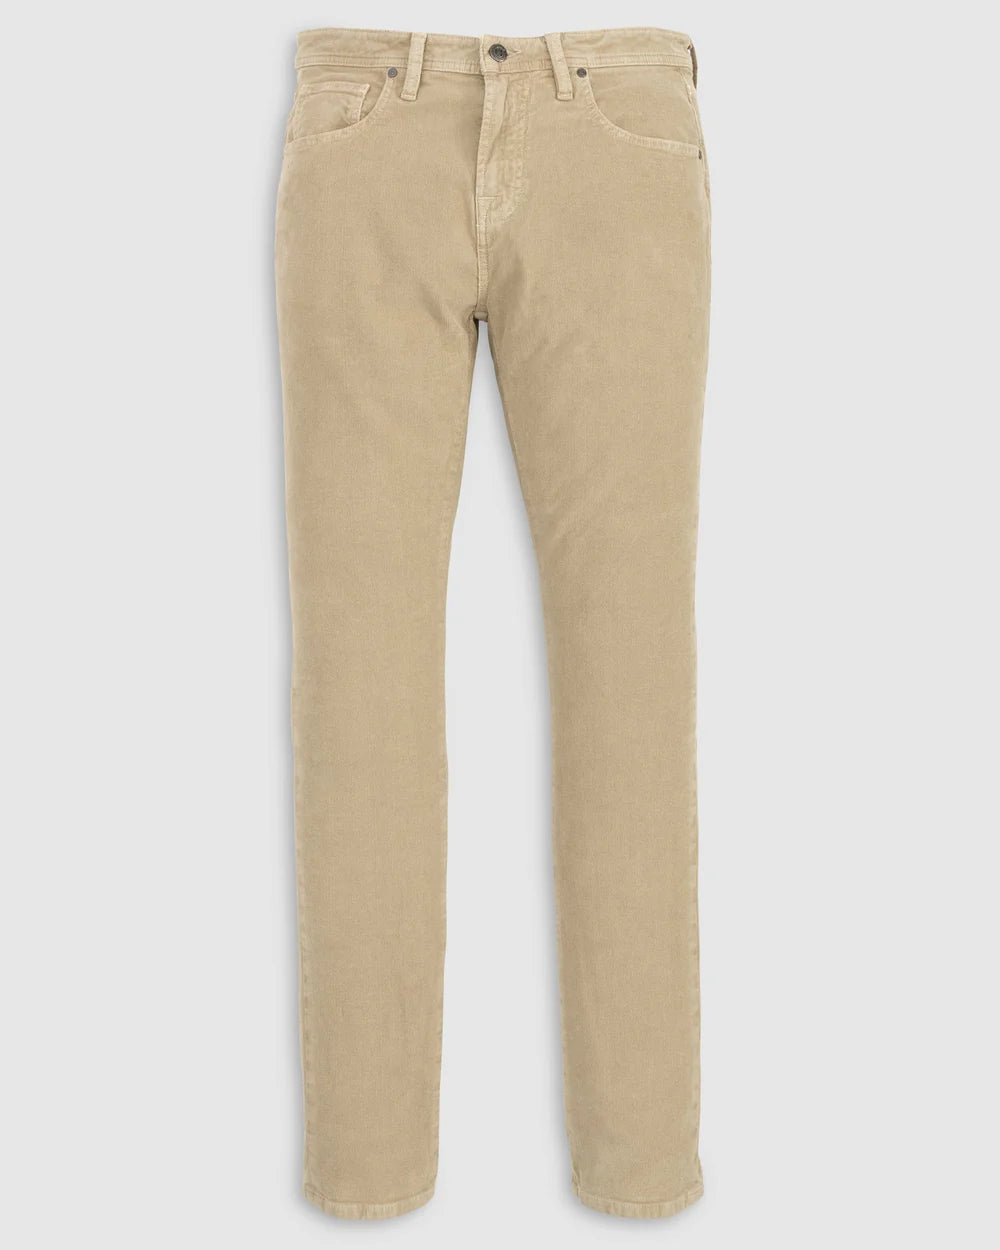 Jeans and Five Pocket Pants – R. Coffee